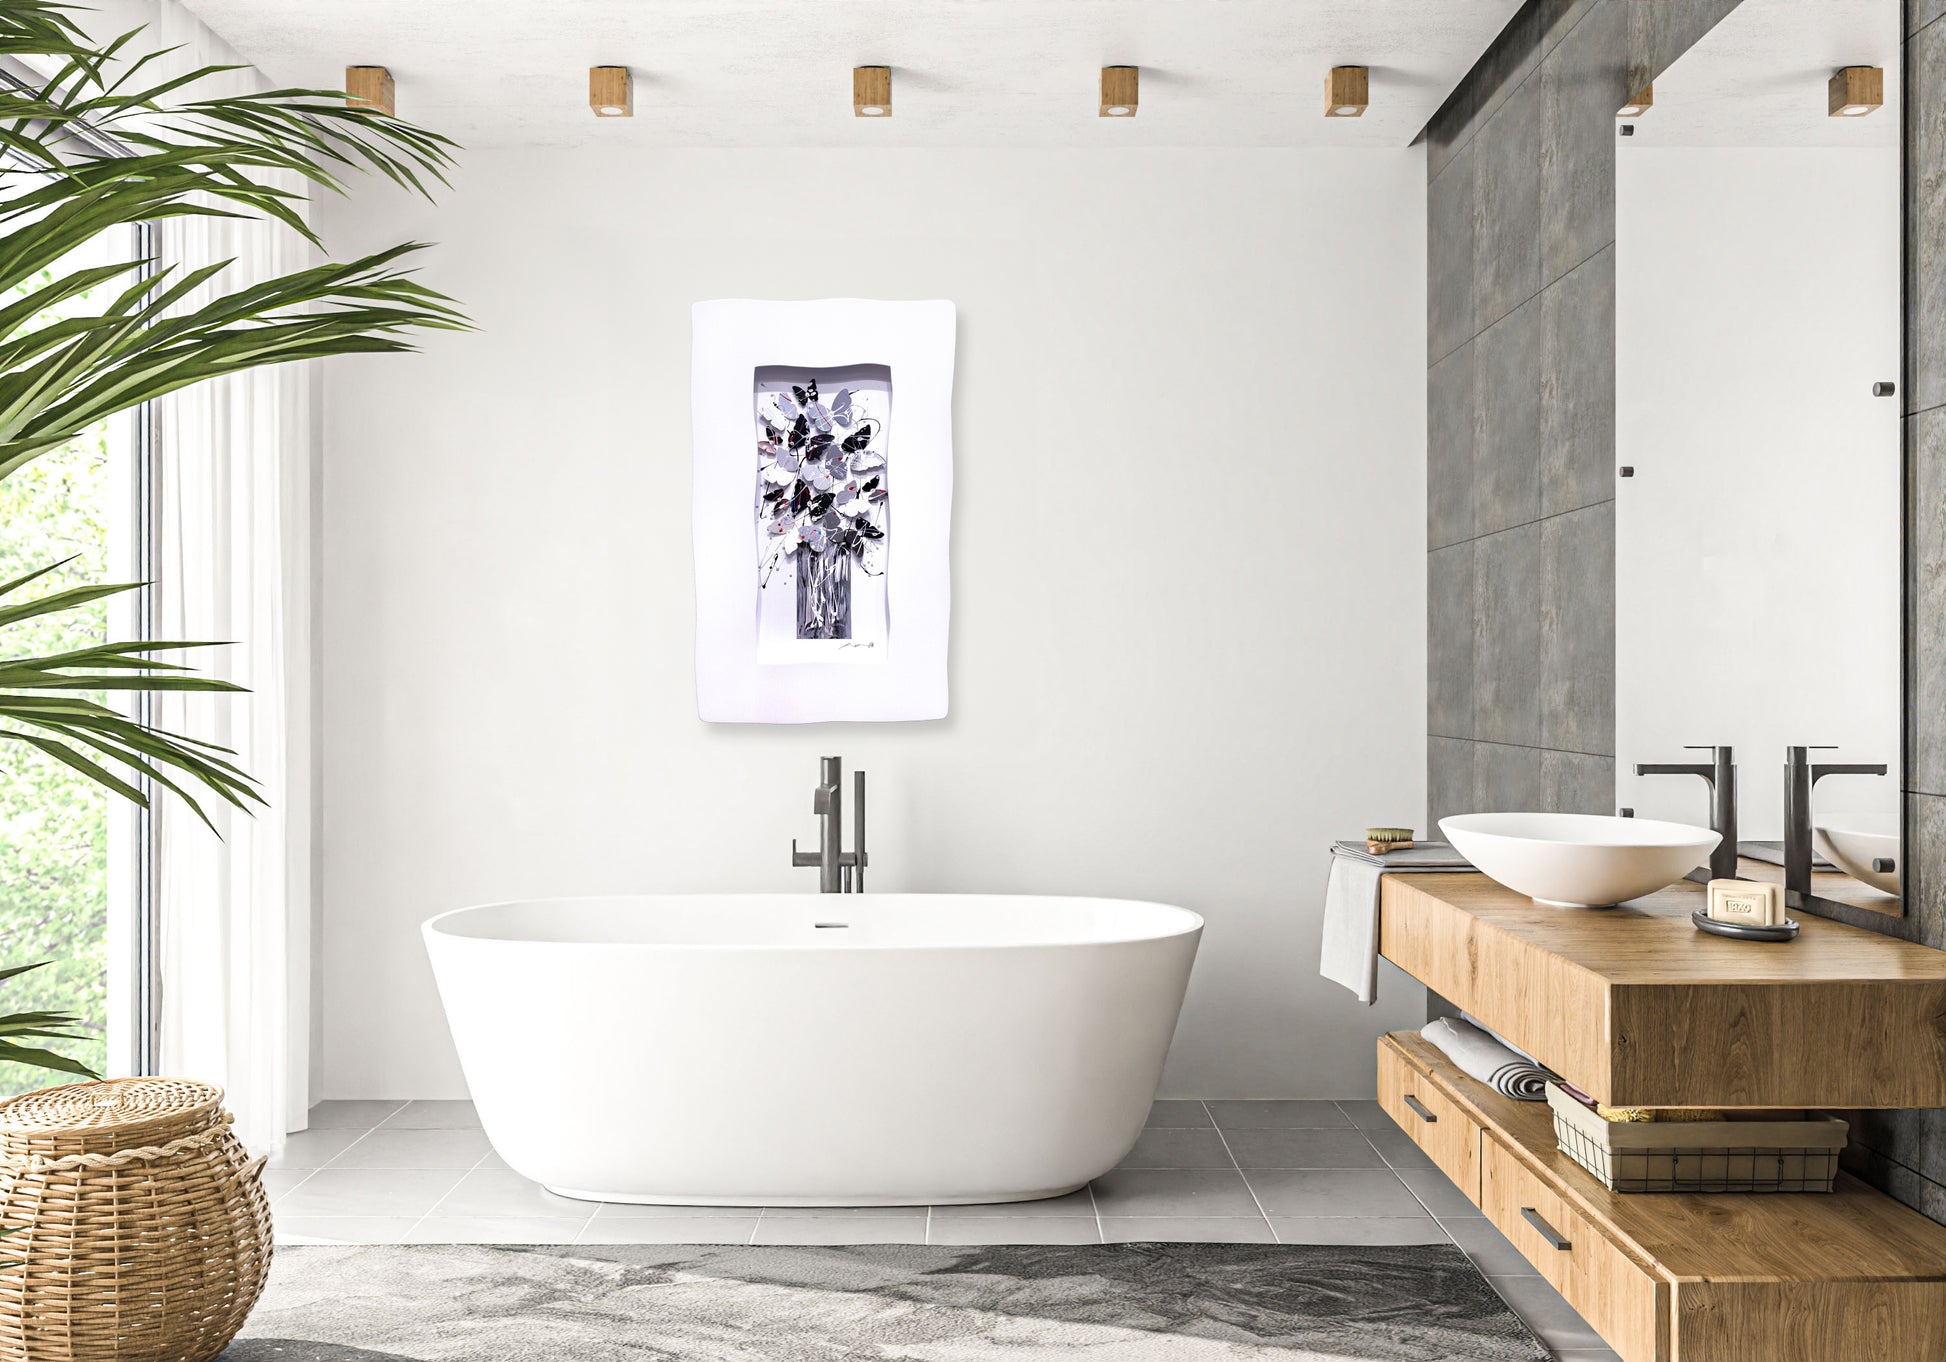 Framed Black & White Tree of Life hanged on a wall above a bathtub